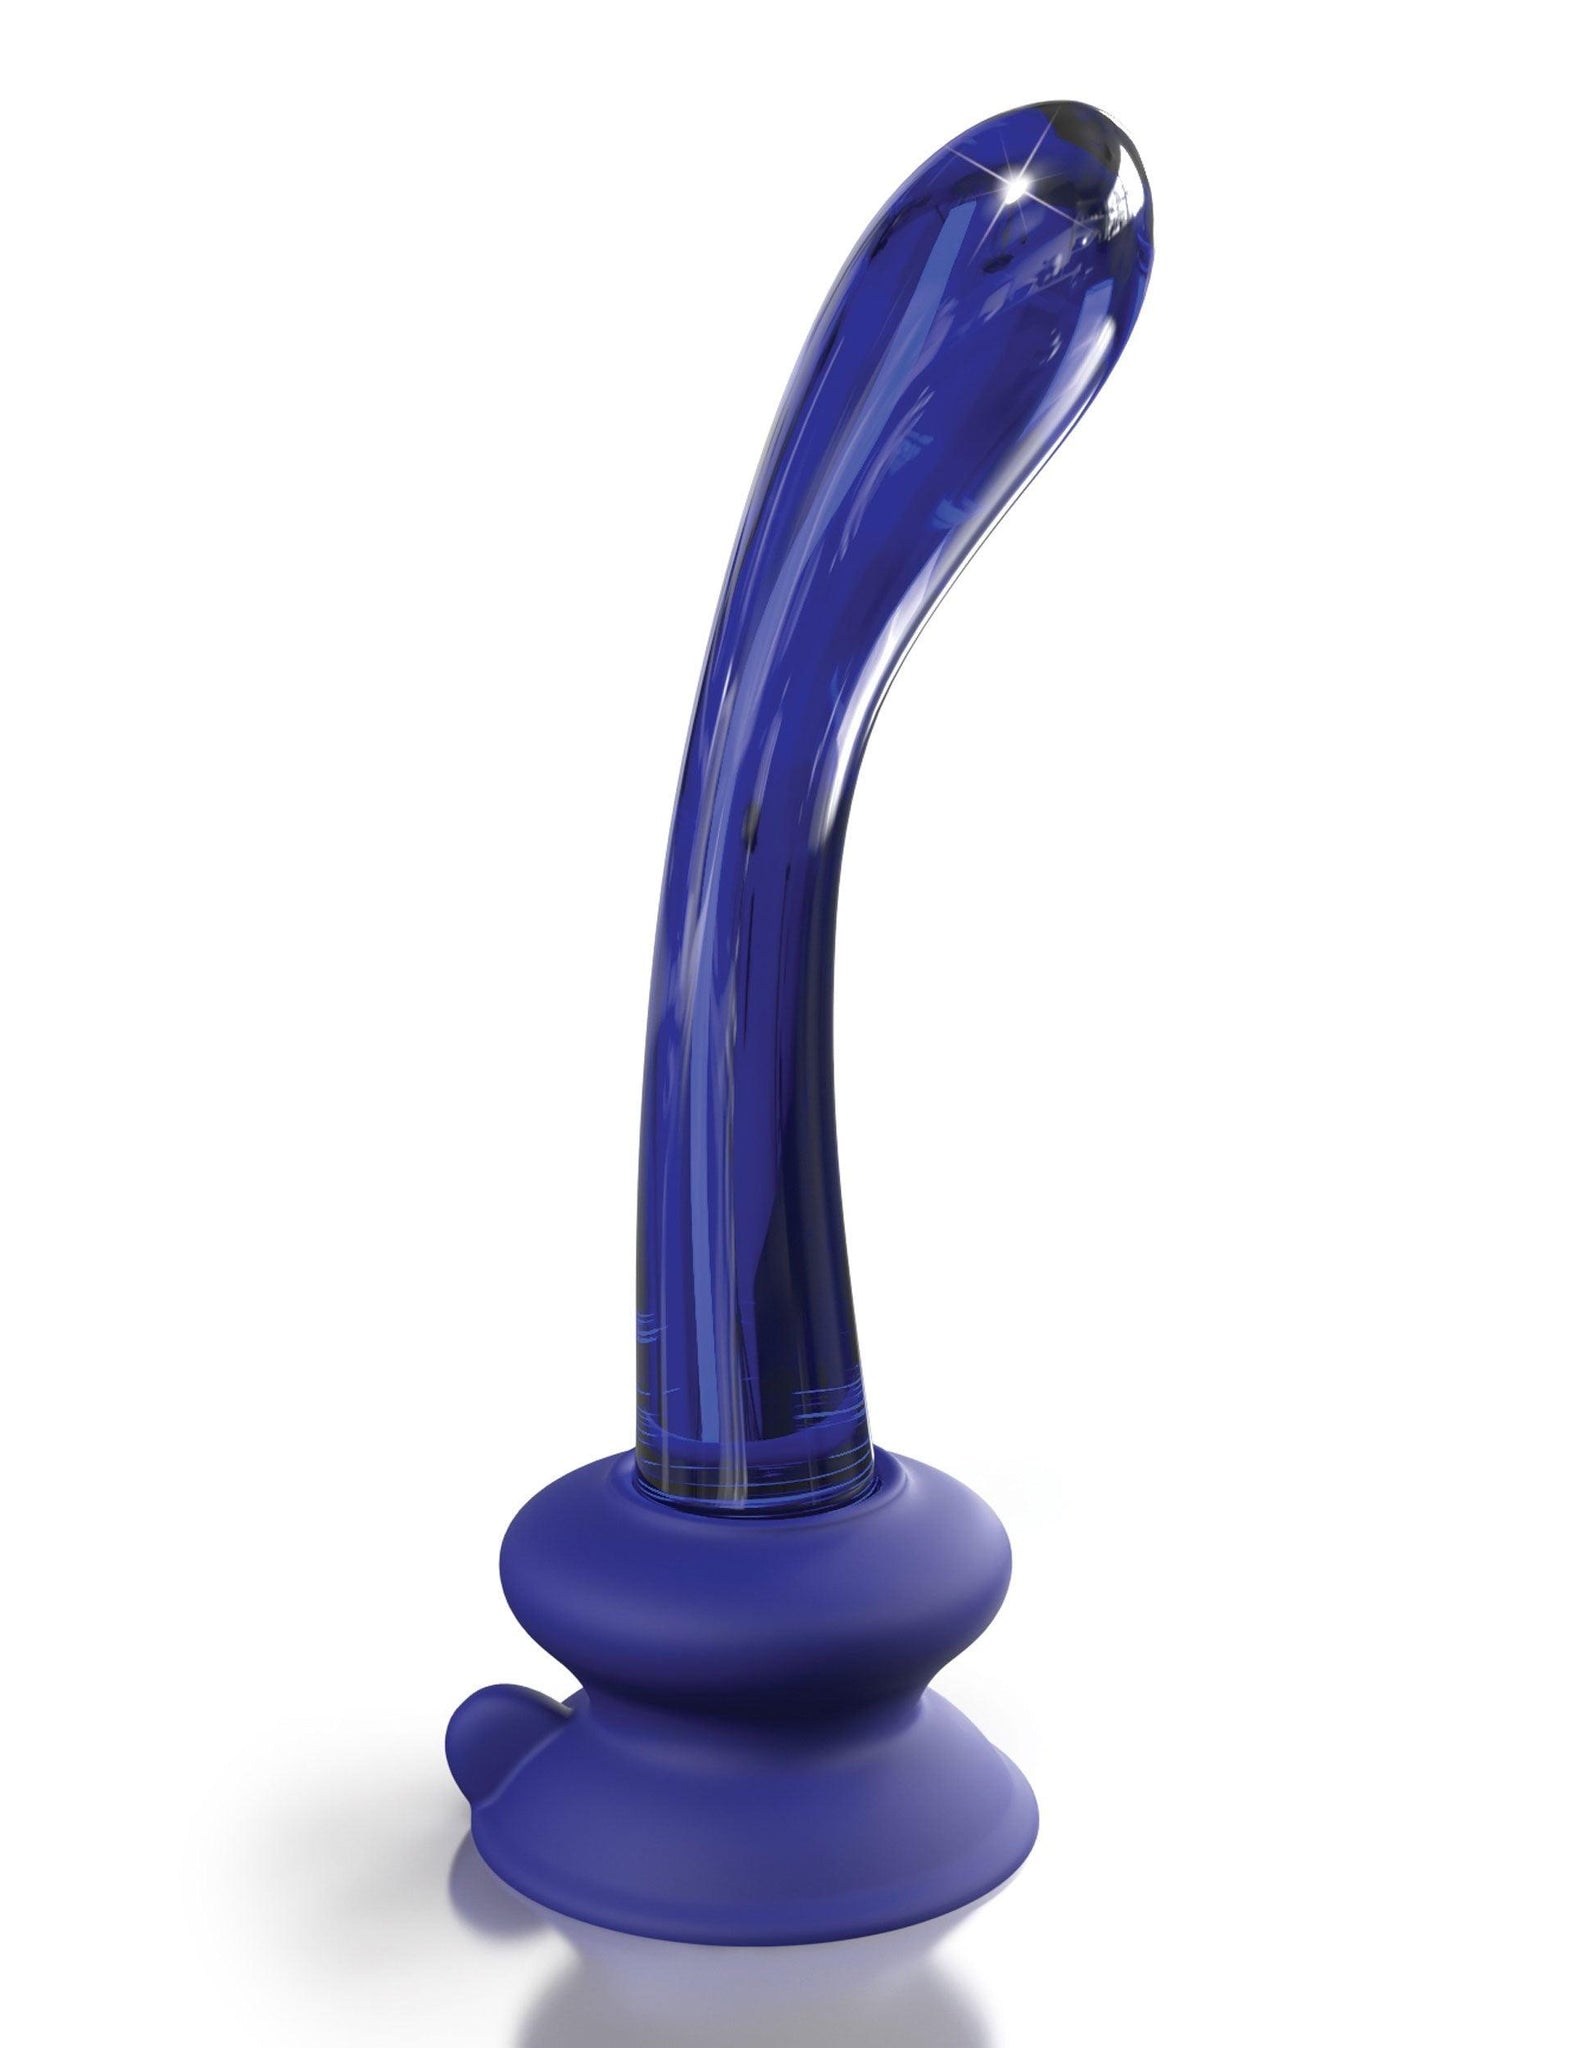 Icicles No. 89 - With Silicone Suction Cup - Purple -